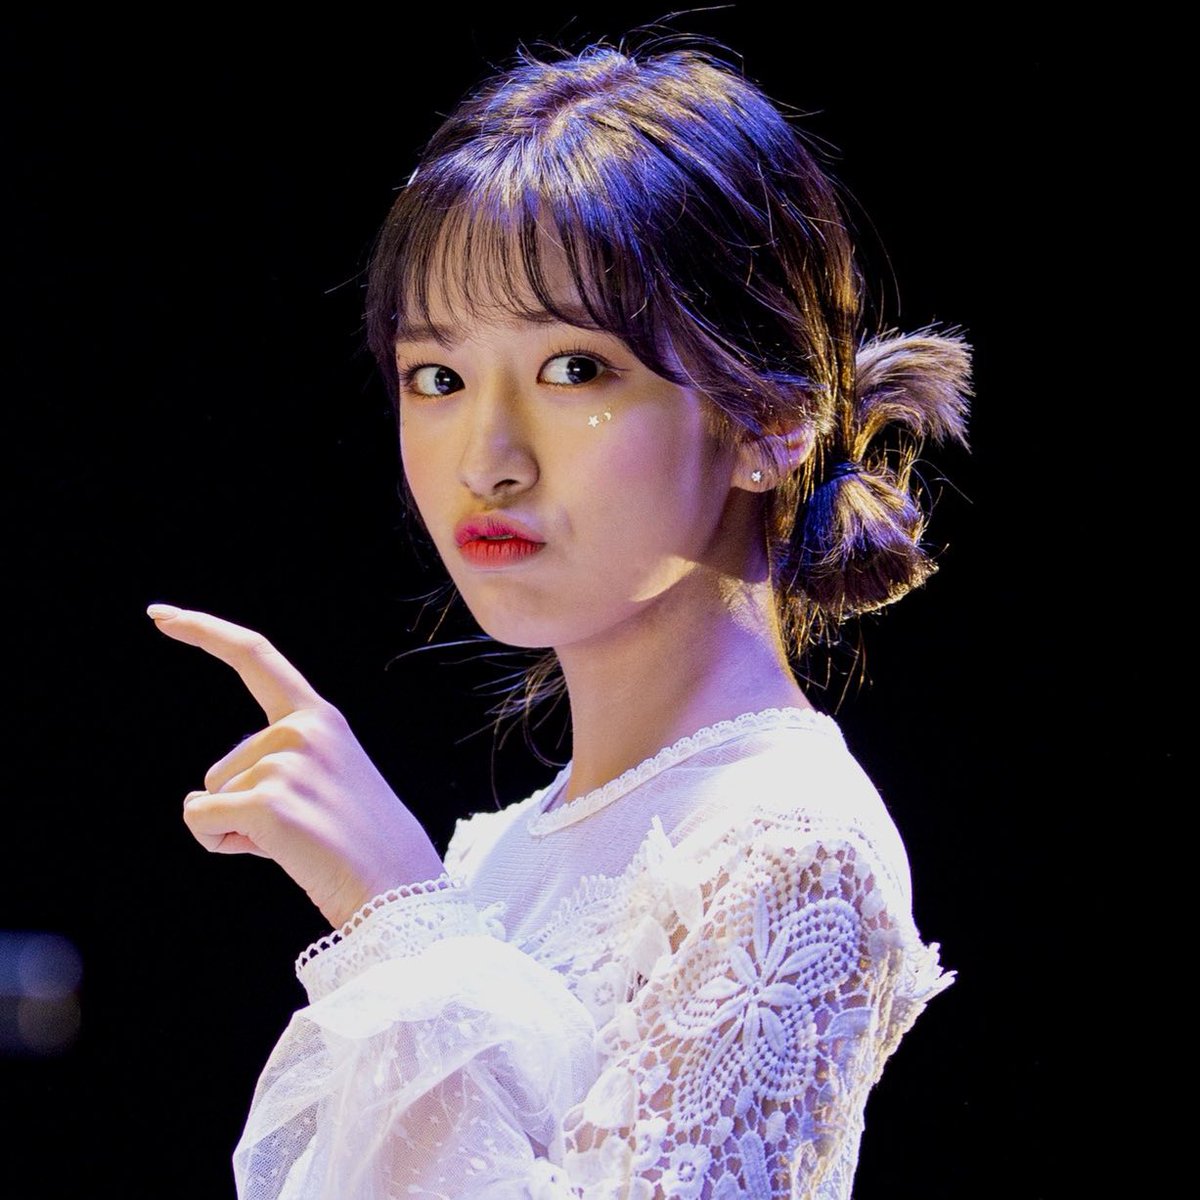 Appreciation thread for Ahn Yujin because she is more than just a young giant all rounder of IZ*ONE.